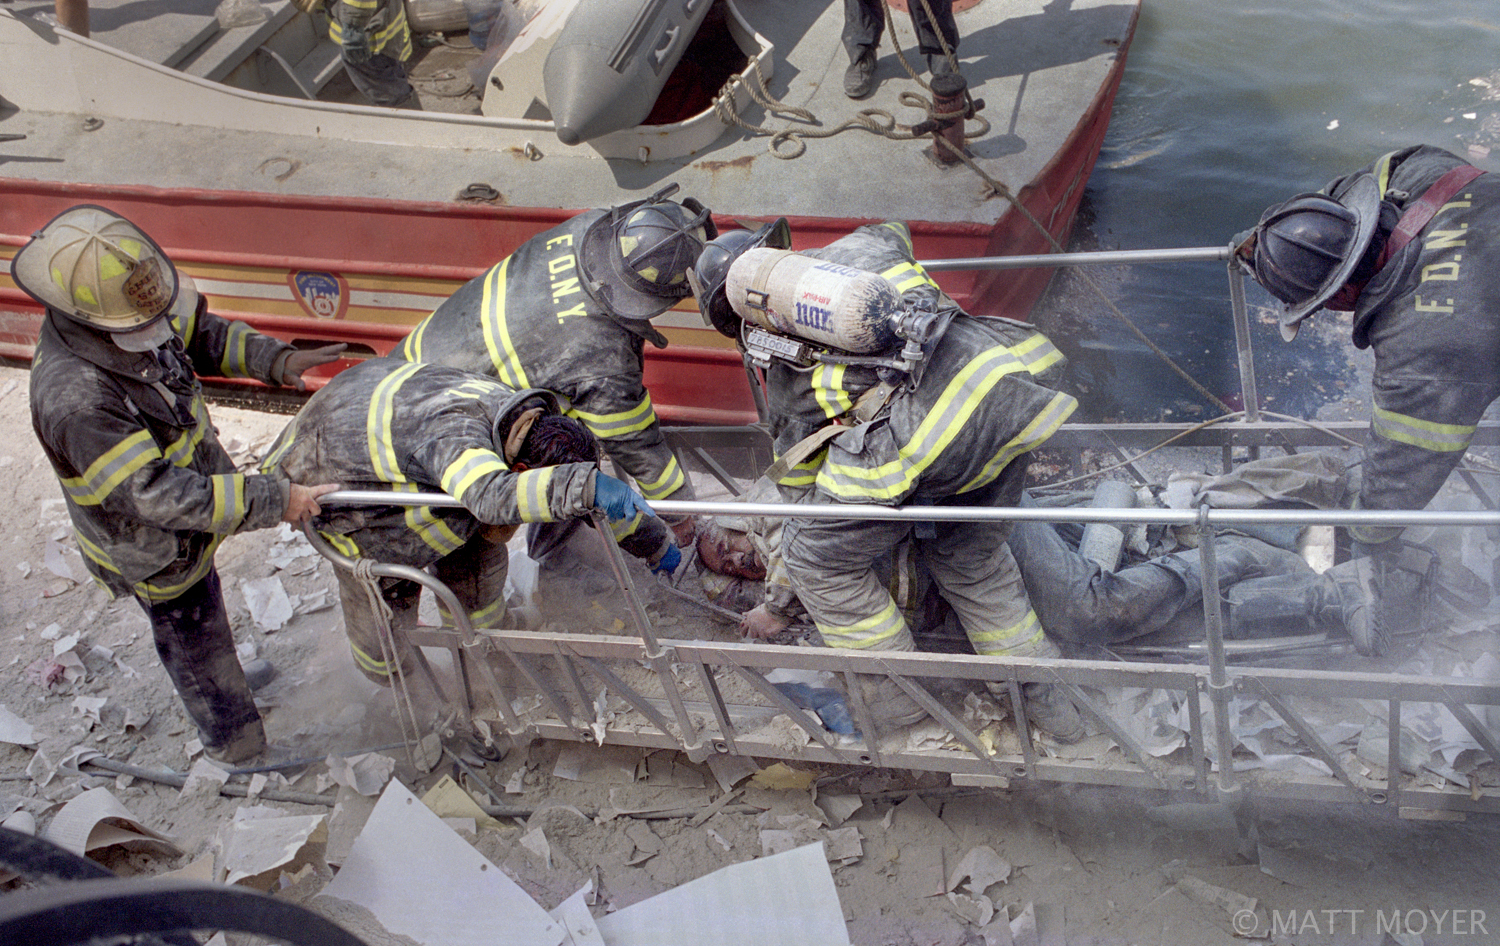  FDNY firefighter, Al Fuentes, is evacuated from a marina in lower Manhattan after he was injured in the collapse of the World Trade Center on Sept. 11, 2001. 